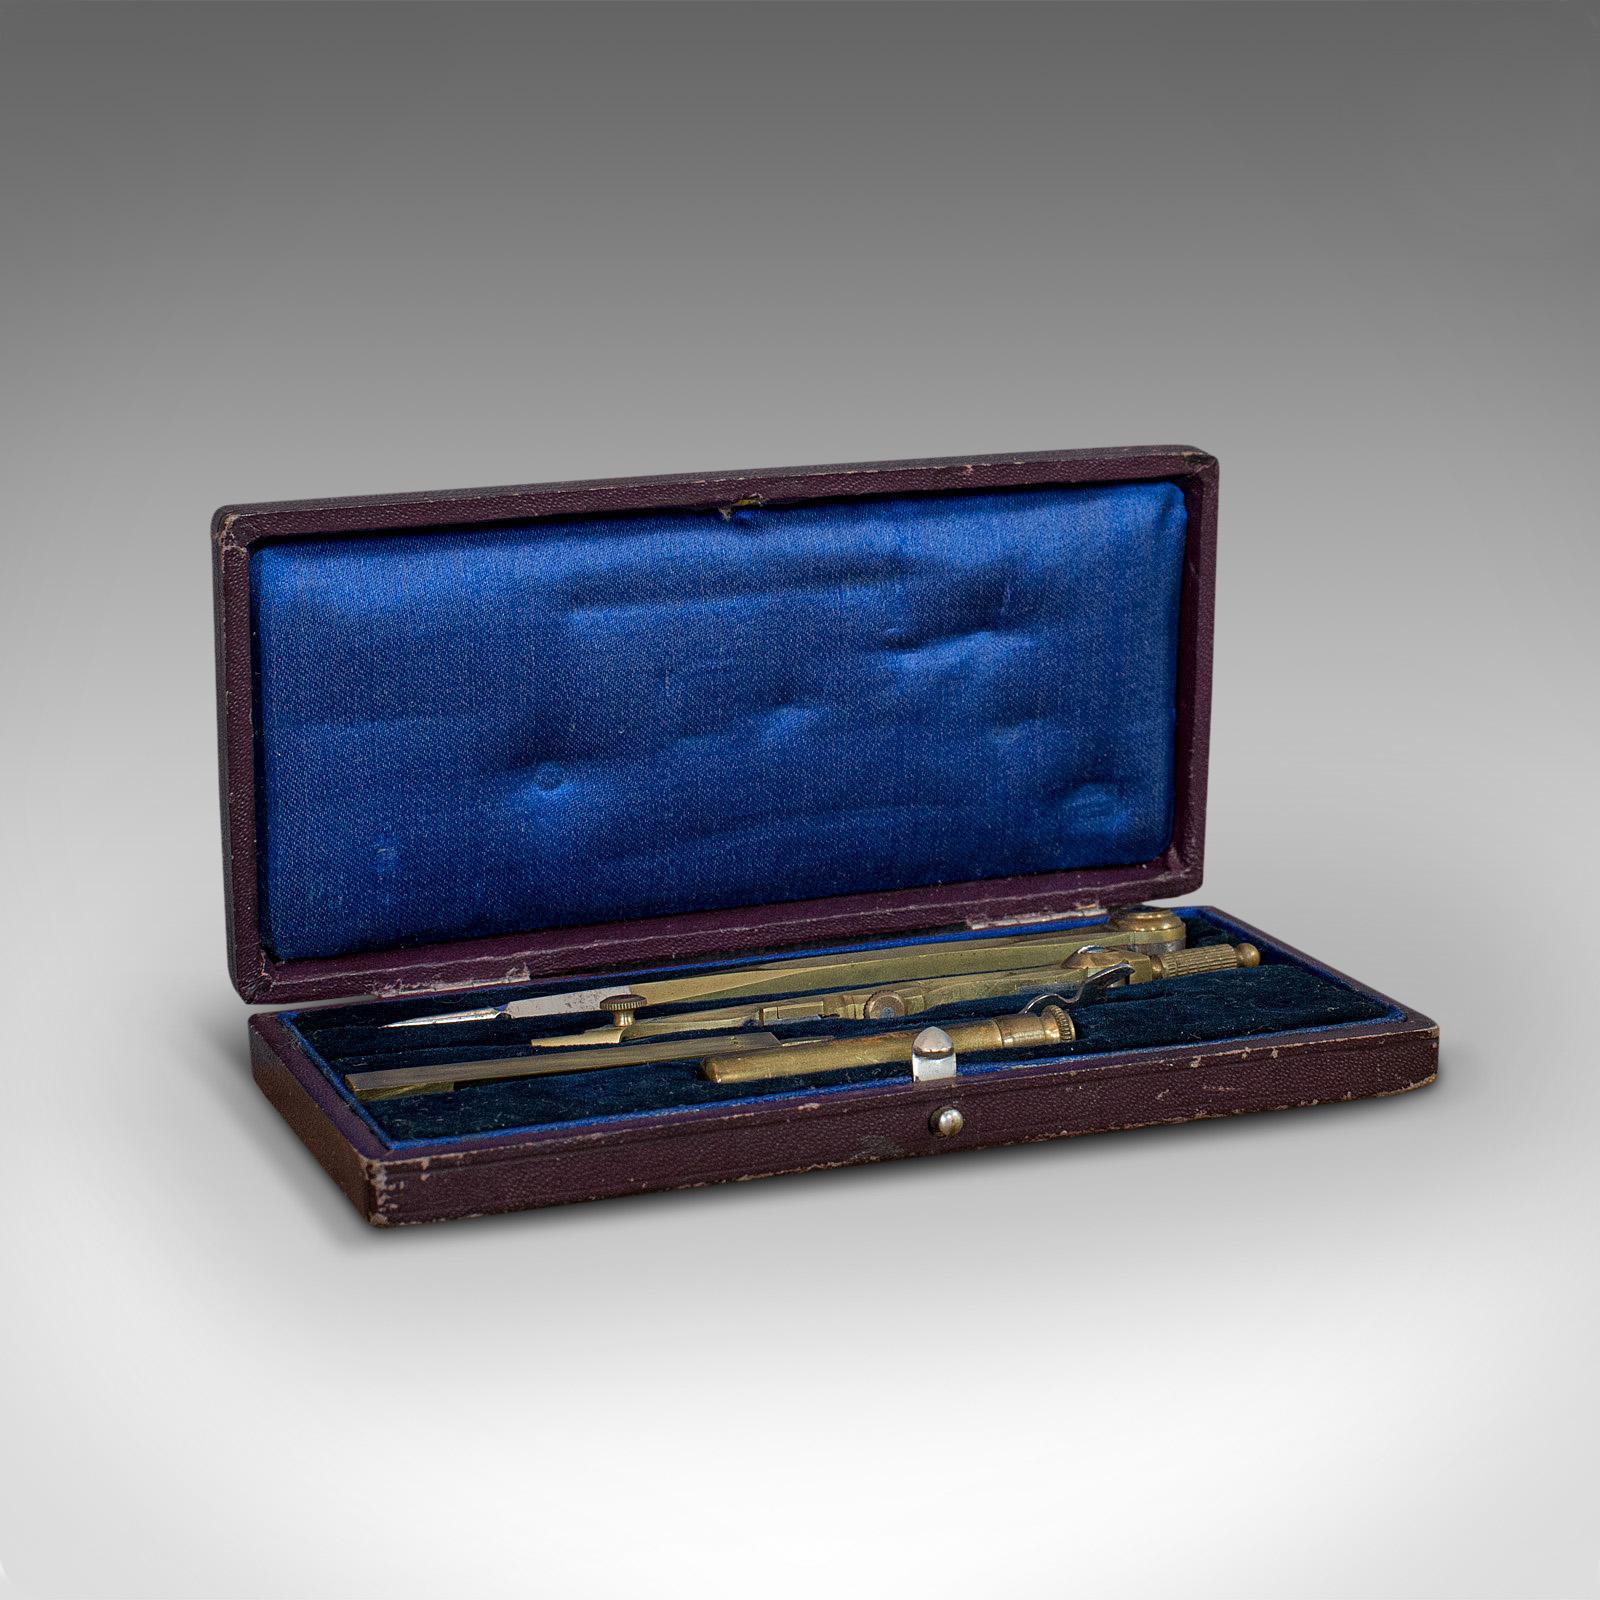 This is a vintage travelling cartographer's compass set. An English, brass drawing instrument case, dating to the early 20th century, circa 1930.

Useful travelling instruments
Displaying a desirable aged patina
Brass instruments in good order